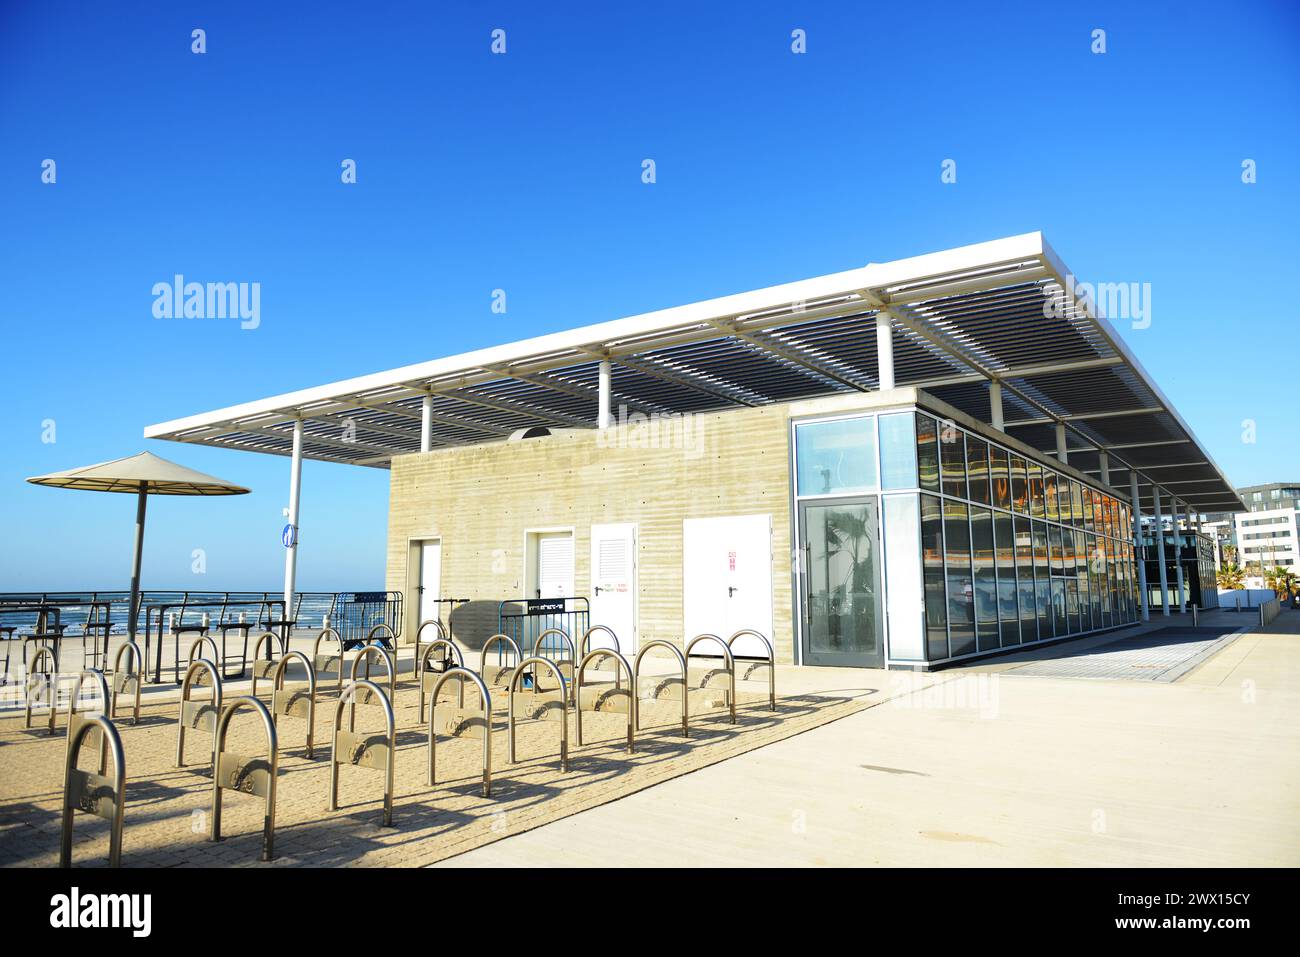 The New Community and Water Sports center in Tel-Aviv, Israel. Stock Photo